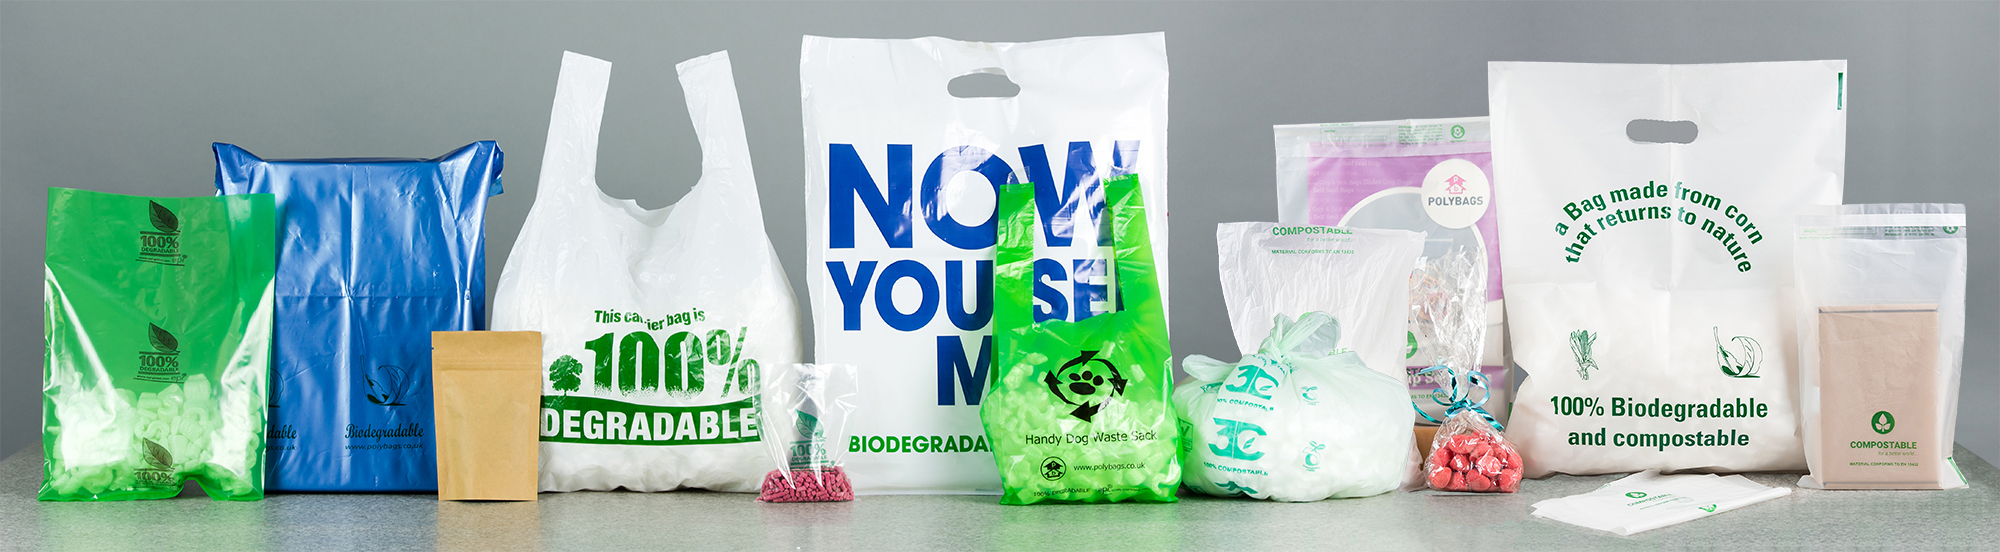 Compostable vs degradable and biodegradable bags